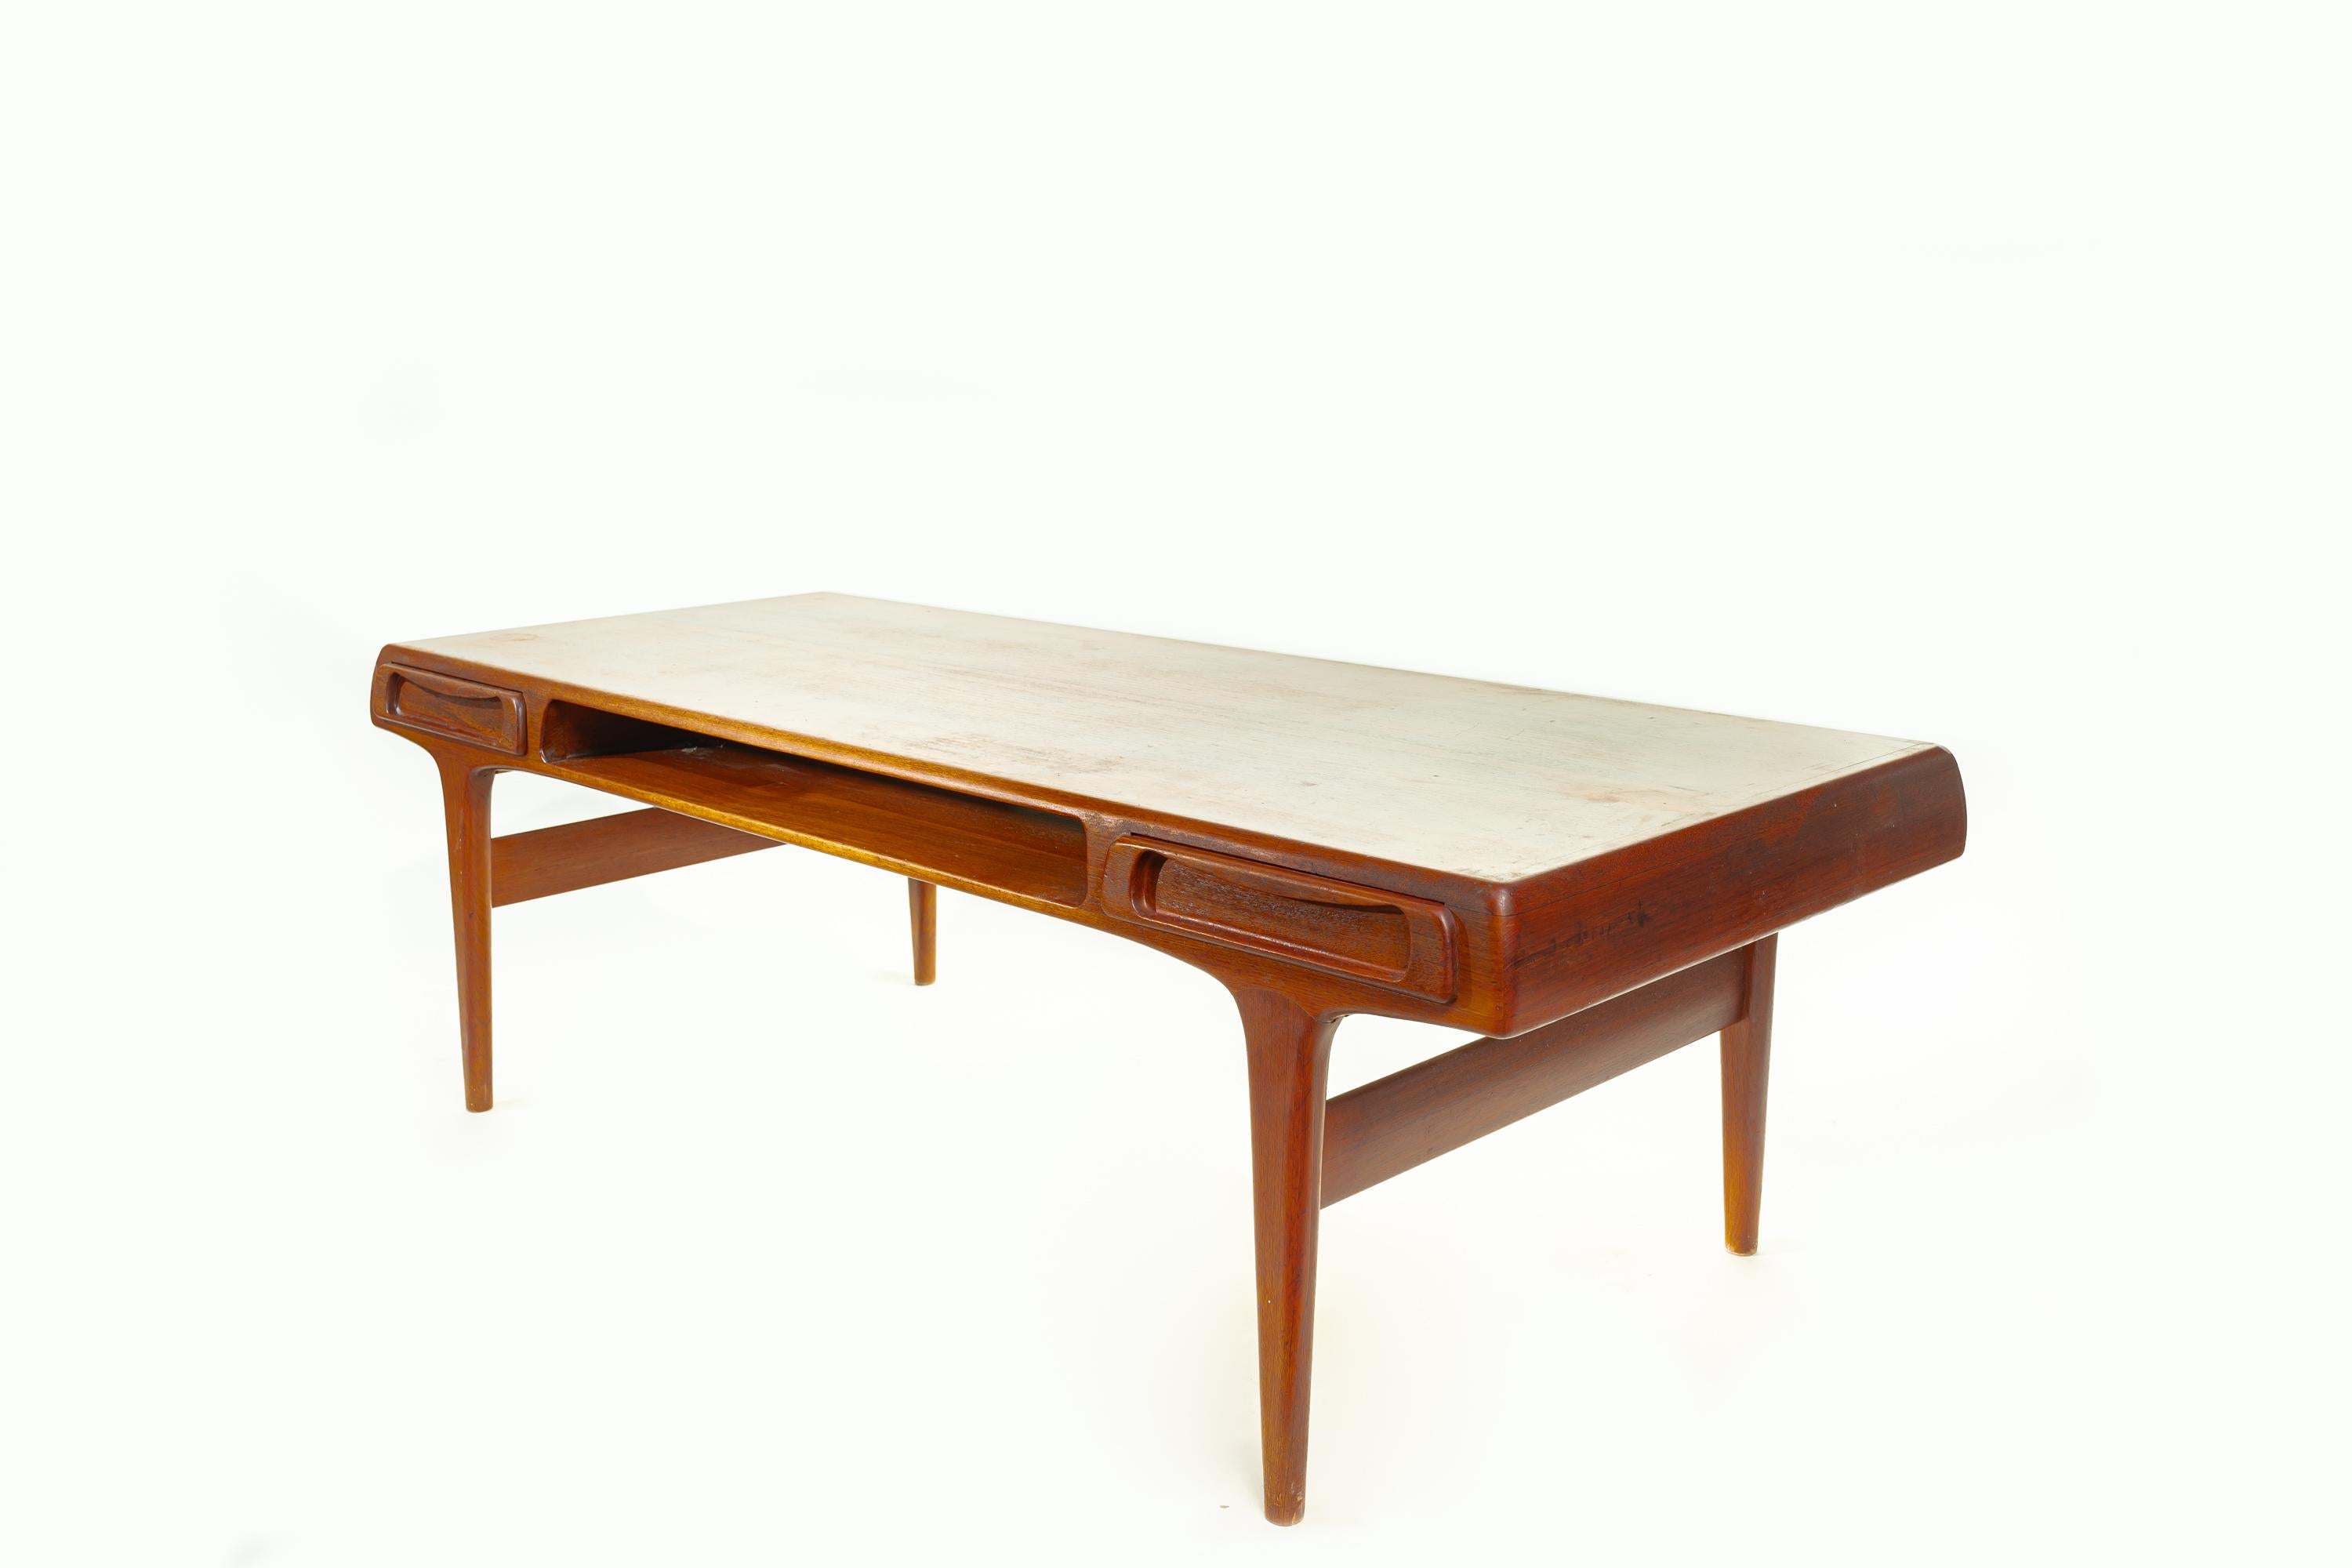 Classic Scandinavian modern mid-century coffee table design by Johannes Andersen. The table is made of solid teak, and it features two side drawers and an open compartment in the middle.

The table is a perfect example of Andersen's signature style.